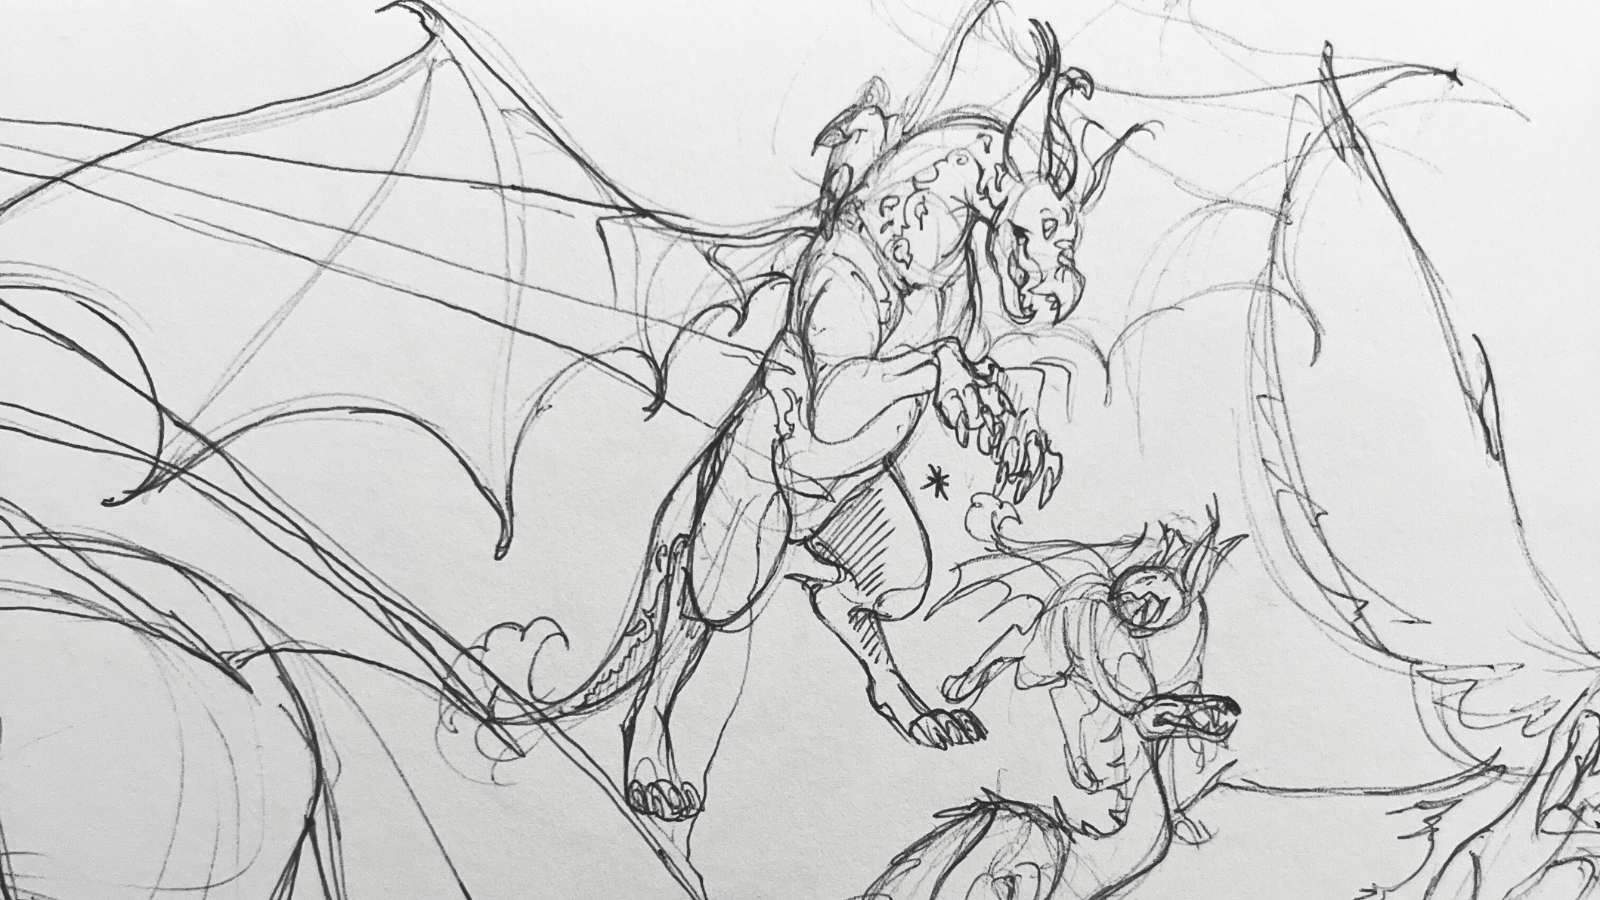 pencil sketch of a dragon with a rider on it's back and a smaller baby dragon